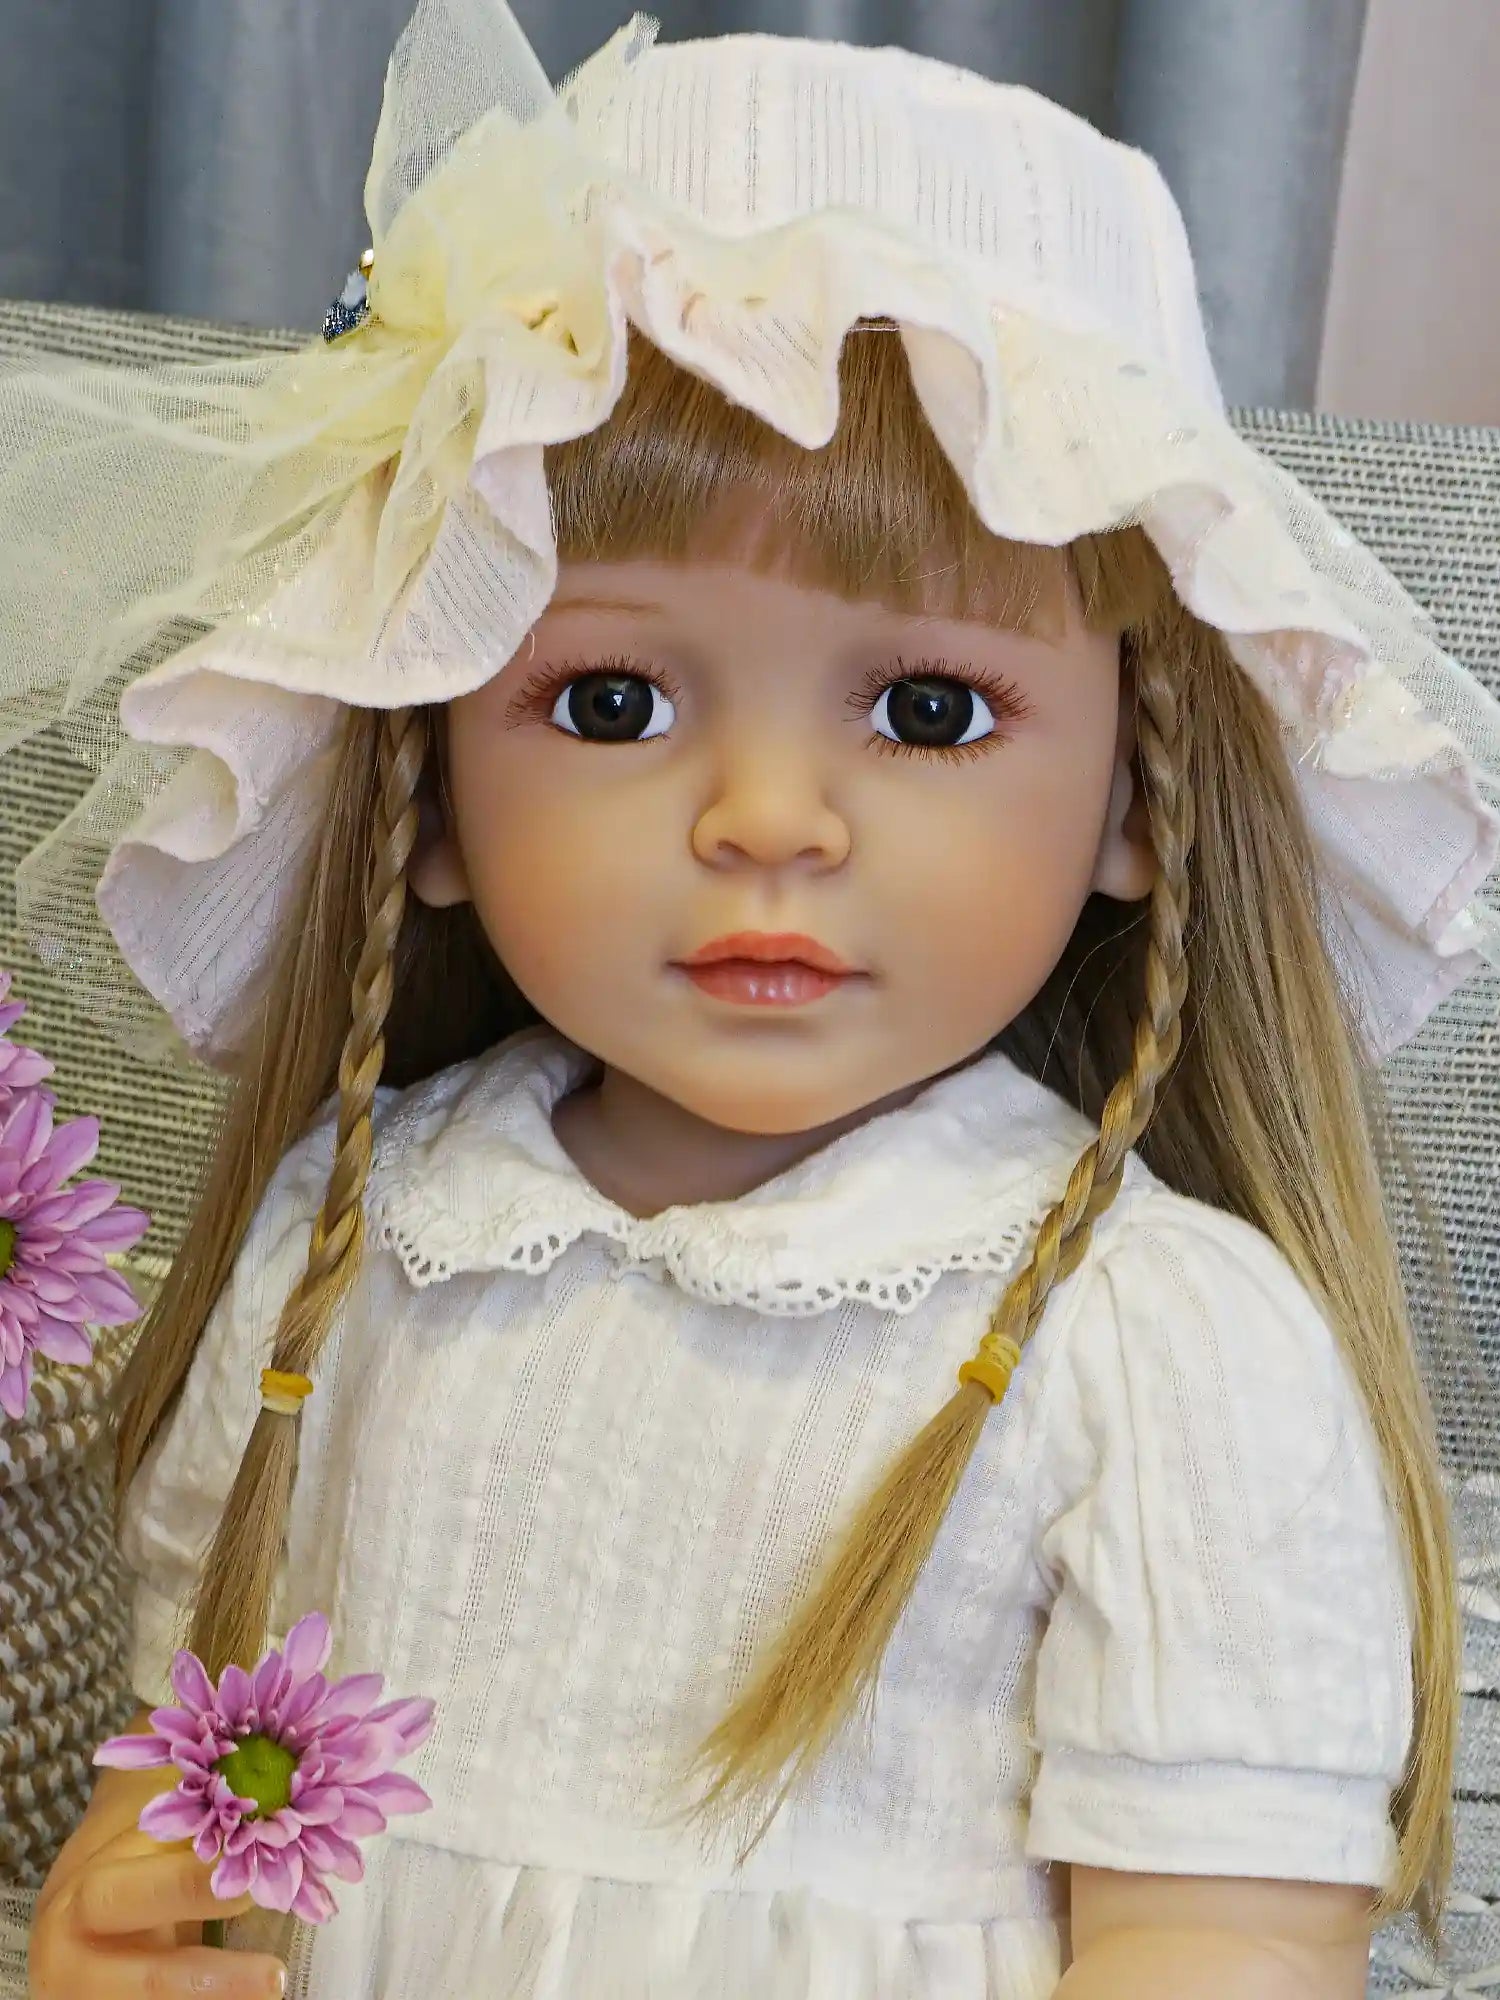 Lifelike reborn doll in a white lace dress and yellow sunhat, seated on a cushion.